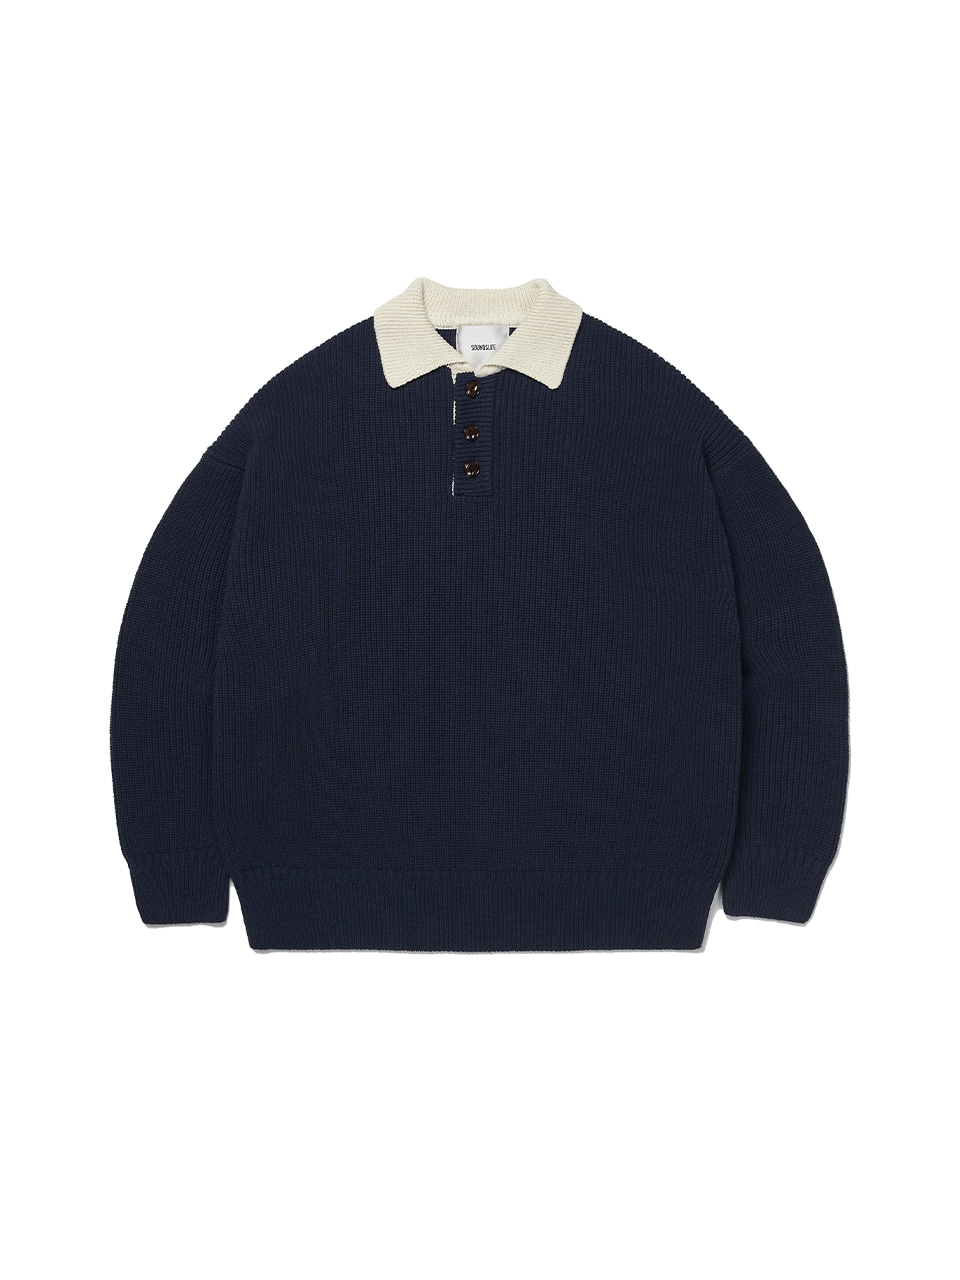 SOUNDSLIFE - Heavy Cotton Rugby Knit Navy